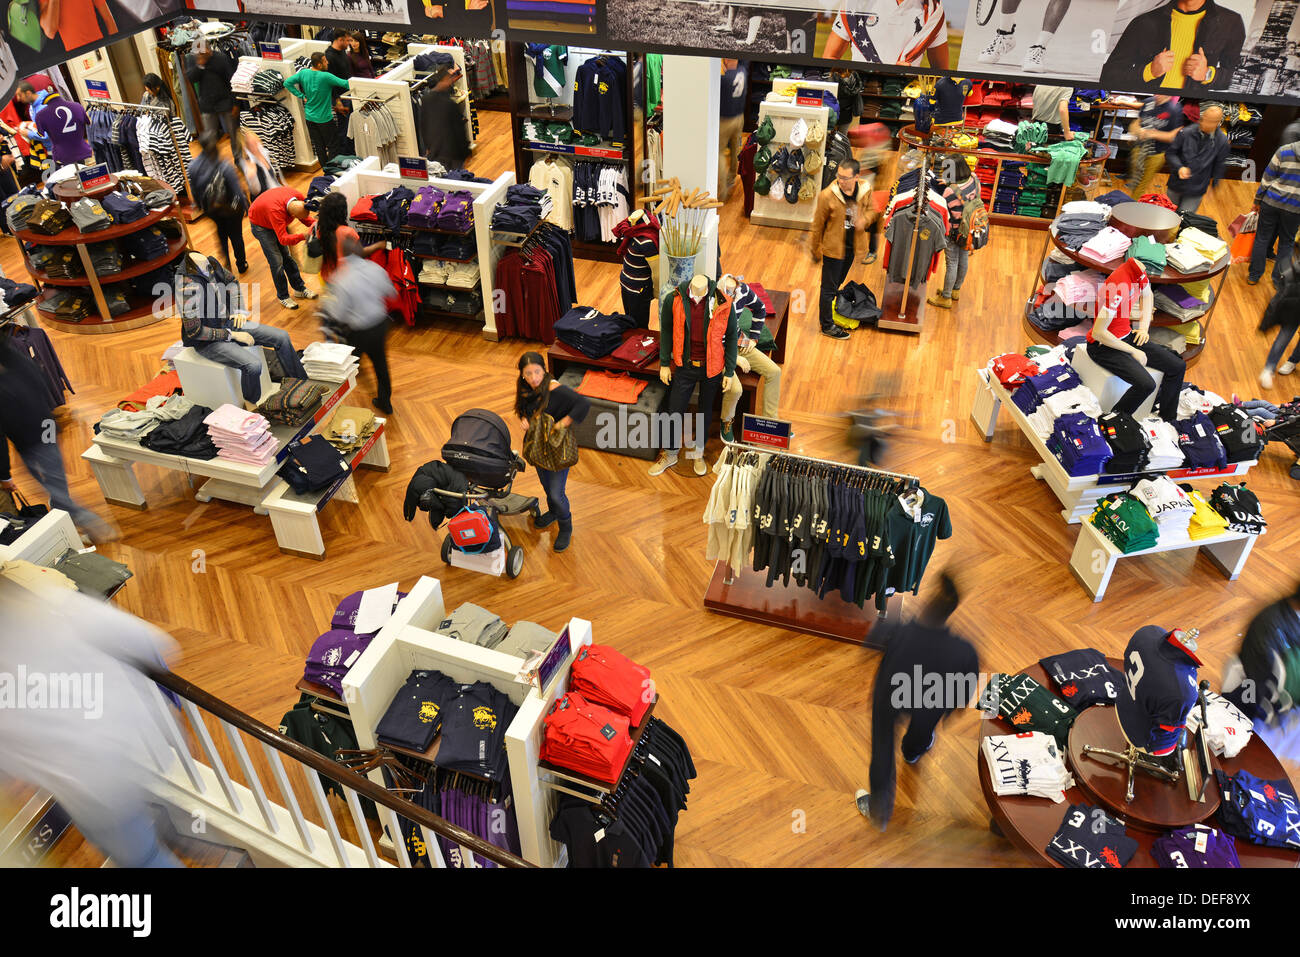 Luxury shopping mall department, clothing store interior. Panorama,  Vilnius, Lithuania 10 April 2022 Stock Photo - Alamy